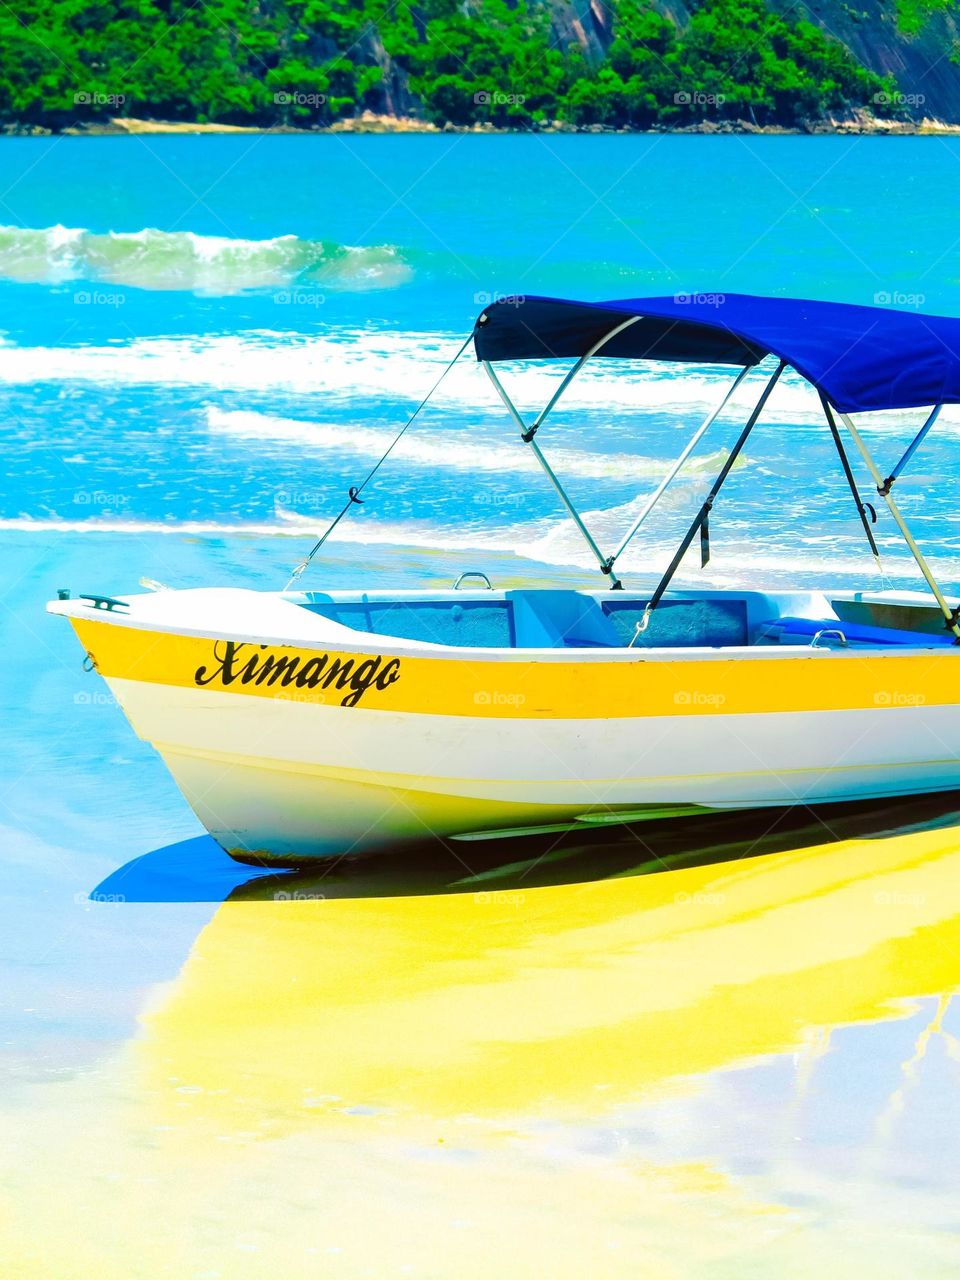 Beautiful Blue and yellow boat on a paradisiacal Beach, with blue ocean waters and white sand, in Brazil